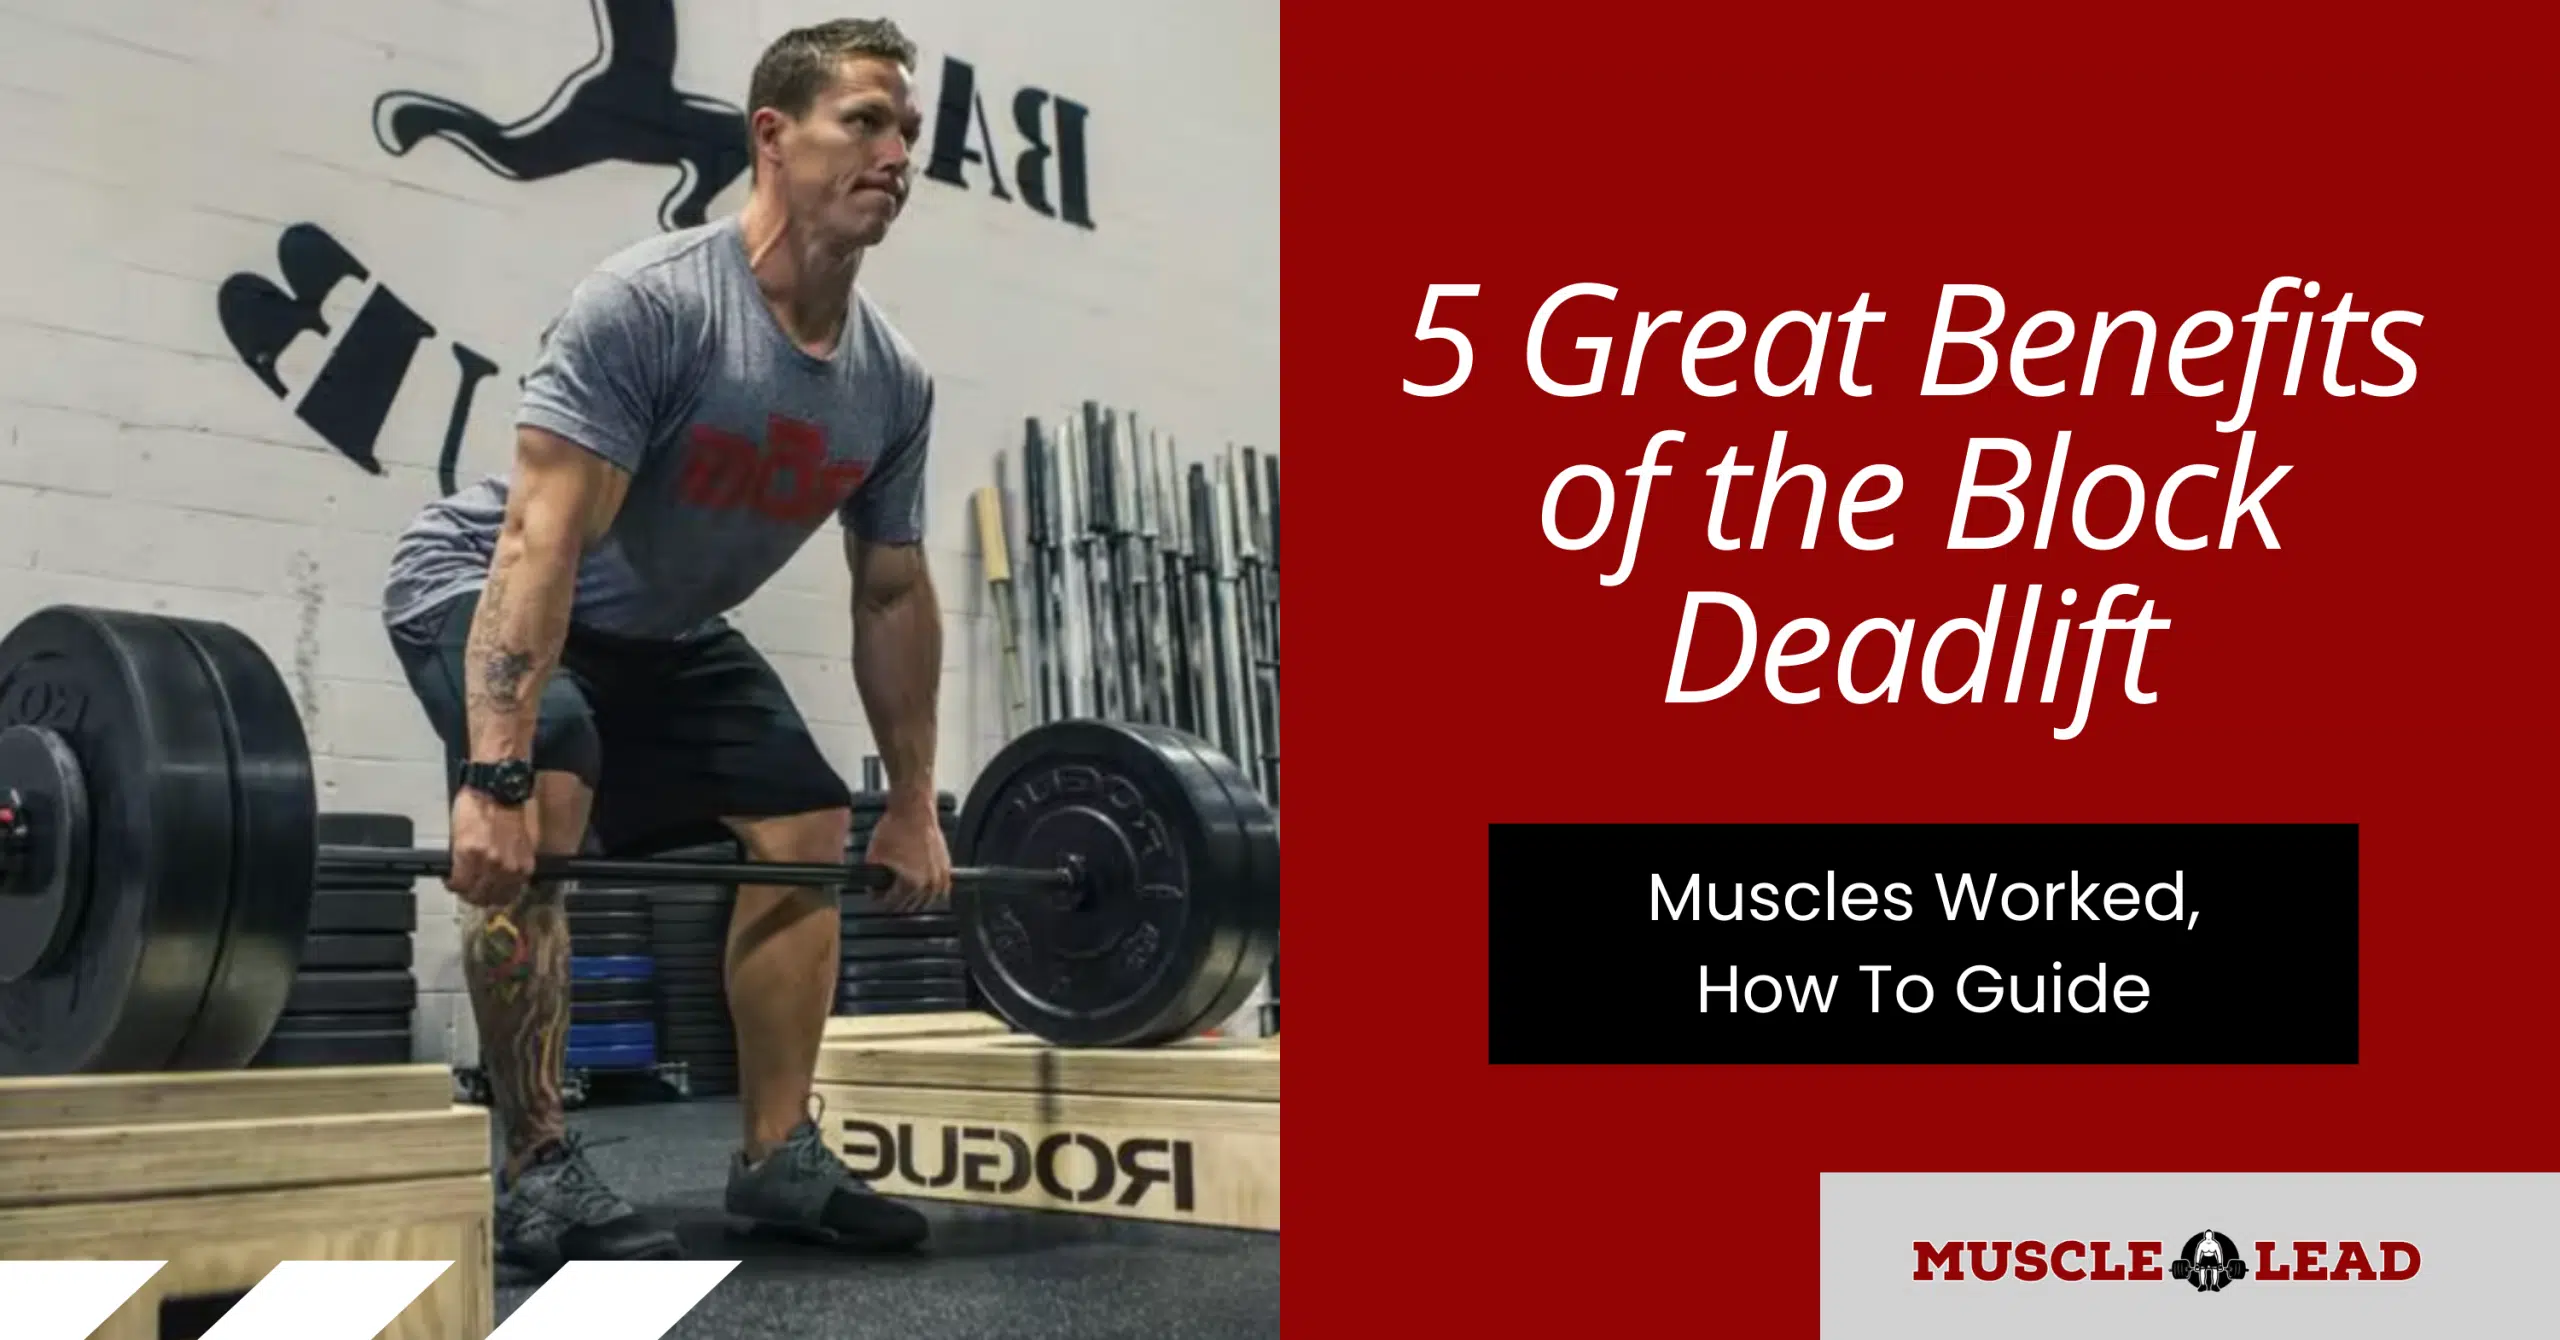 5 Great Benefits of the Block Deadlift Muscles Worked, How To Guide